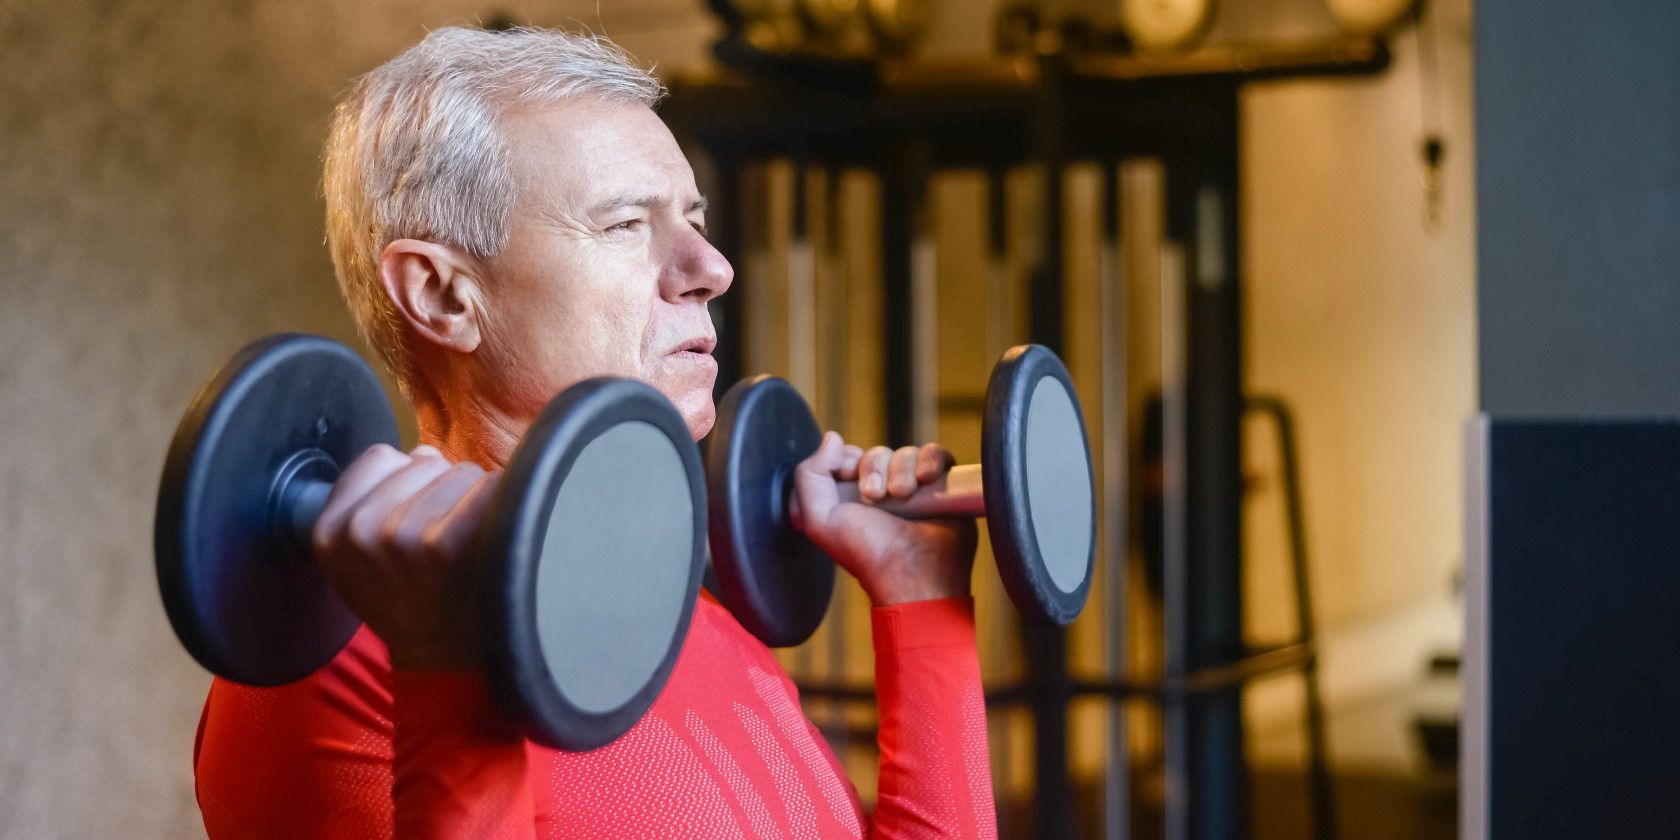 Core Exercise For Seniors (With Resistance Band) — More Life Health -  Seniors Health & Fitness